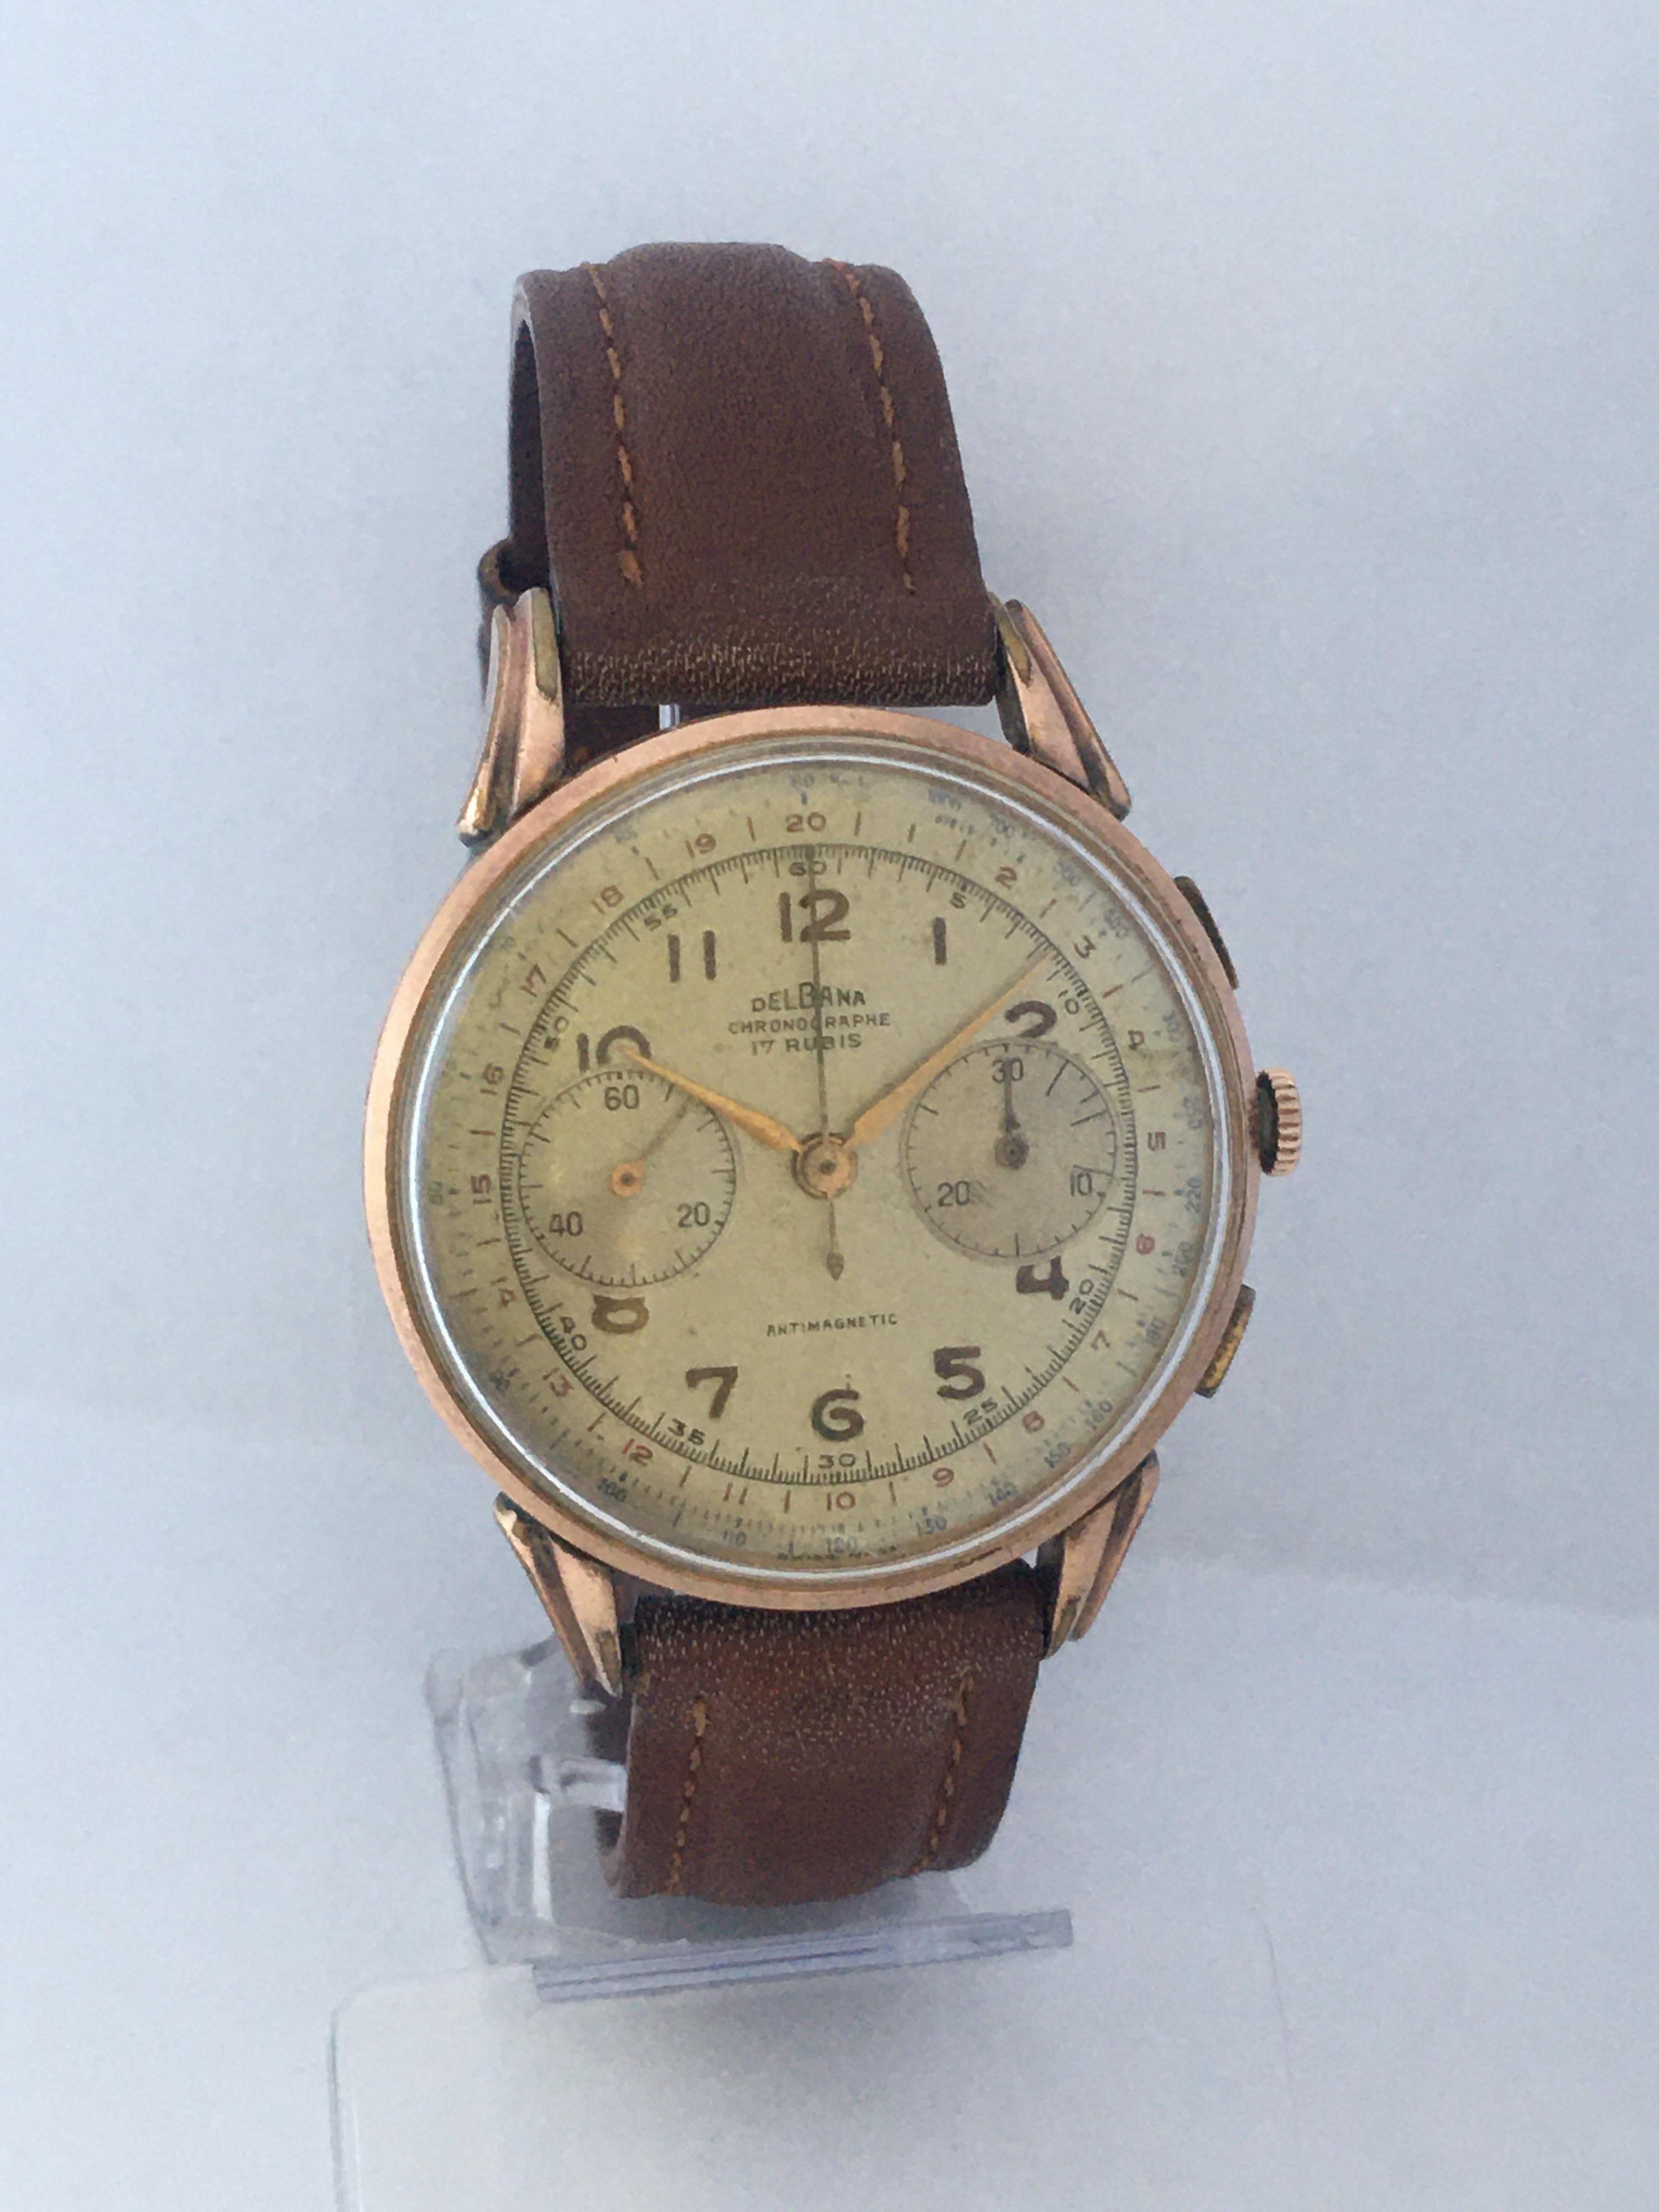 Vintage 1950s Gold Plate Chronograph Mechanical Gents Watch by Delbana Watch 7